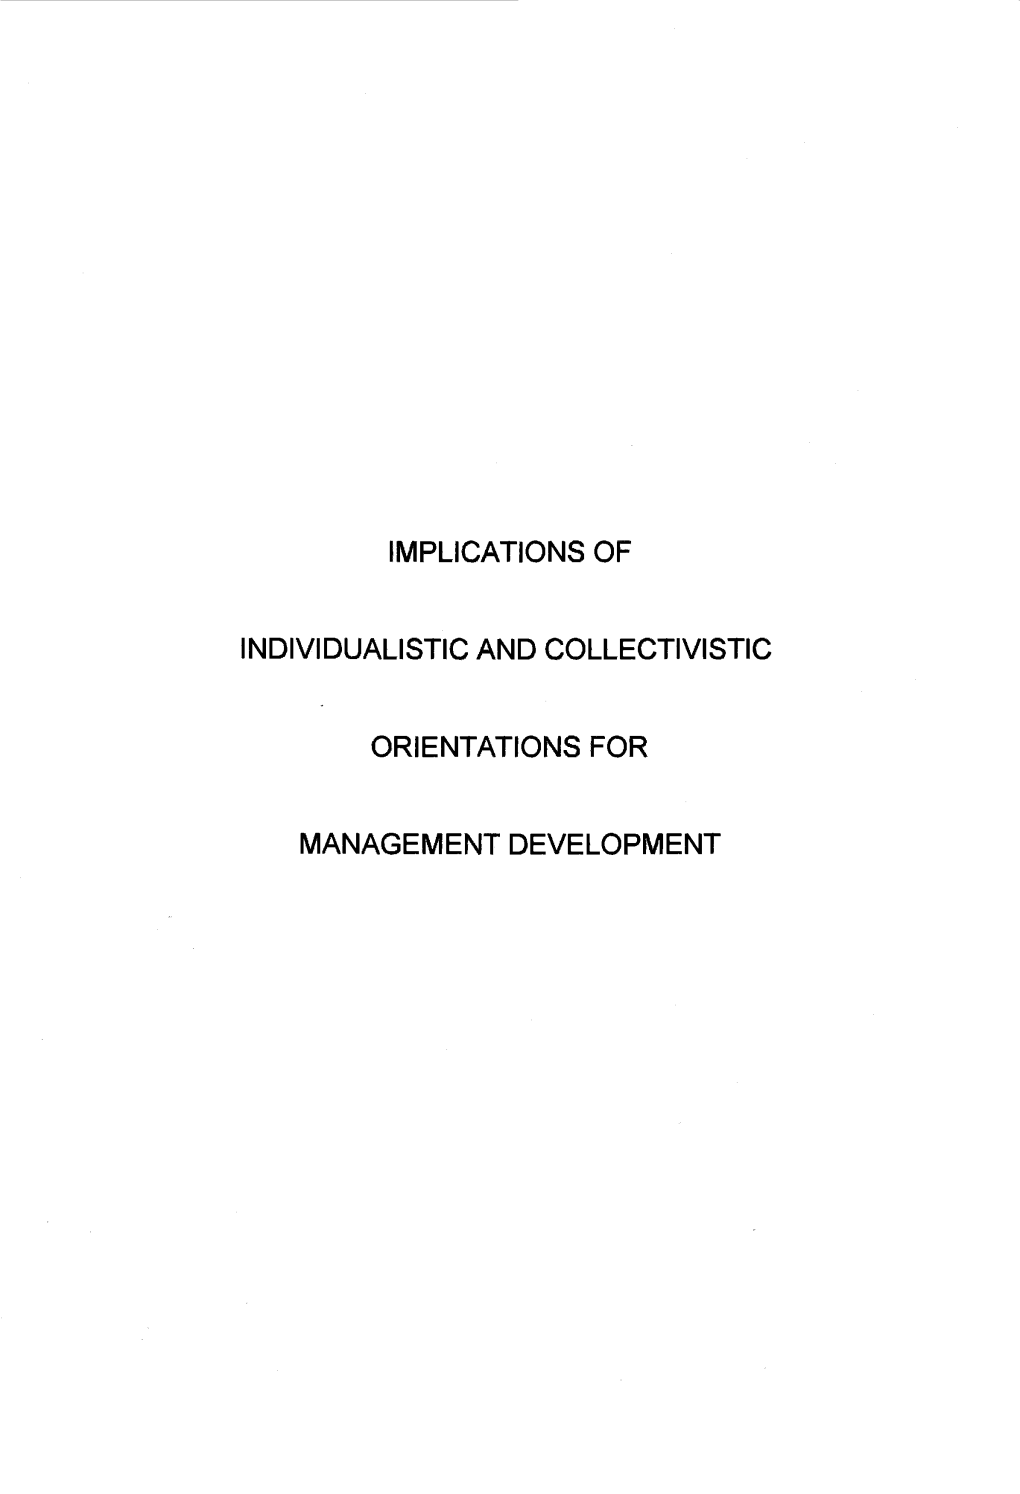 Implications of Individualistic and Collectivistic Orientations for Management Development